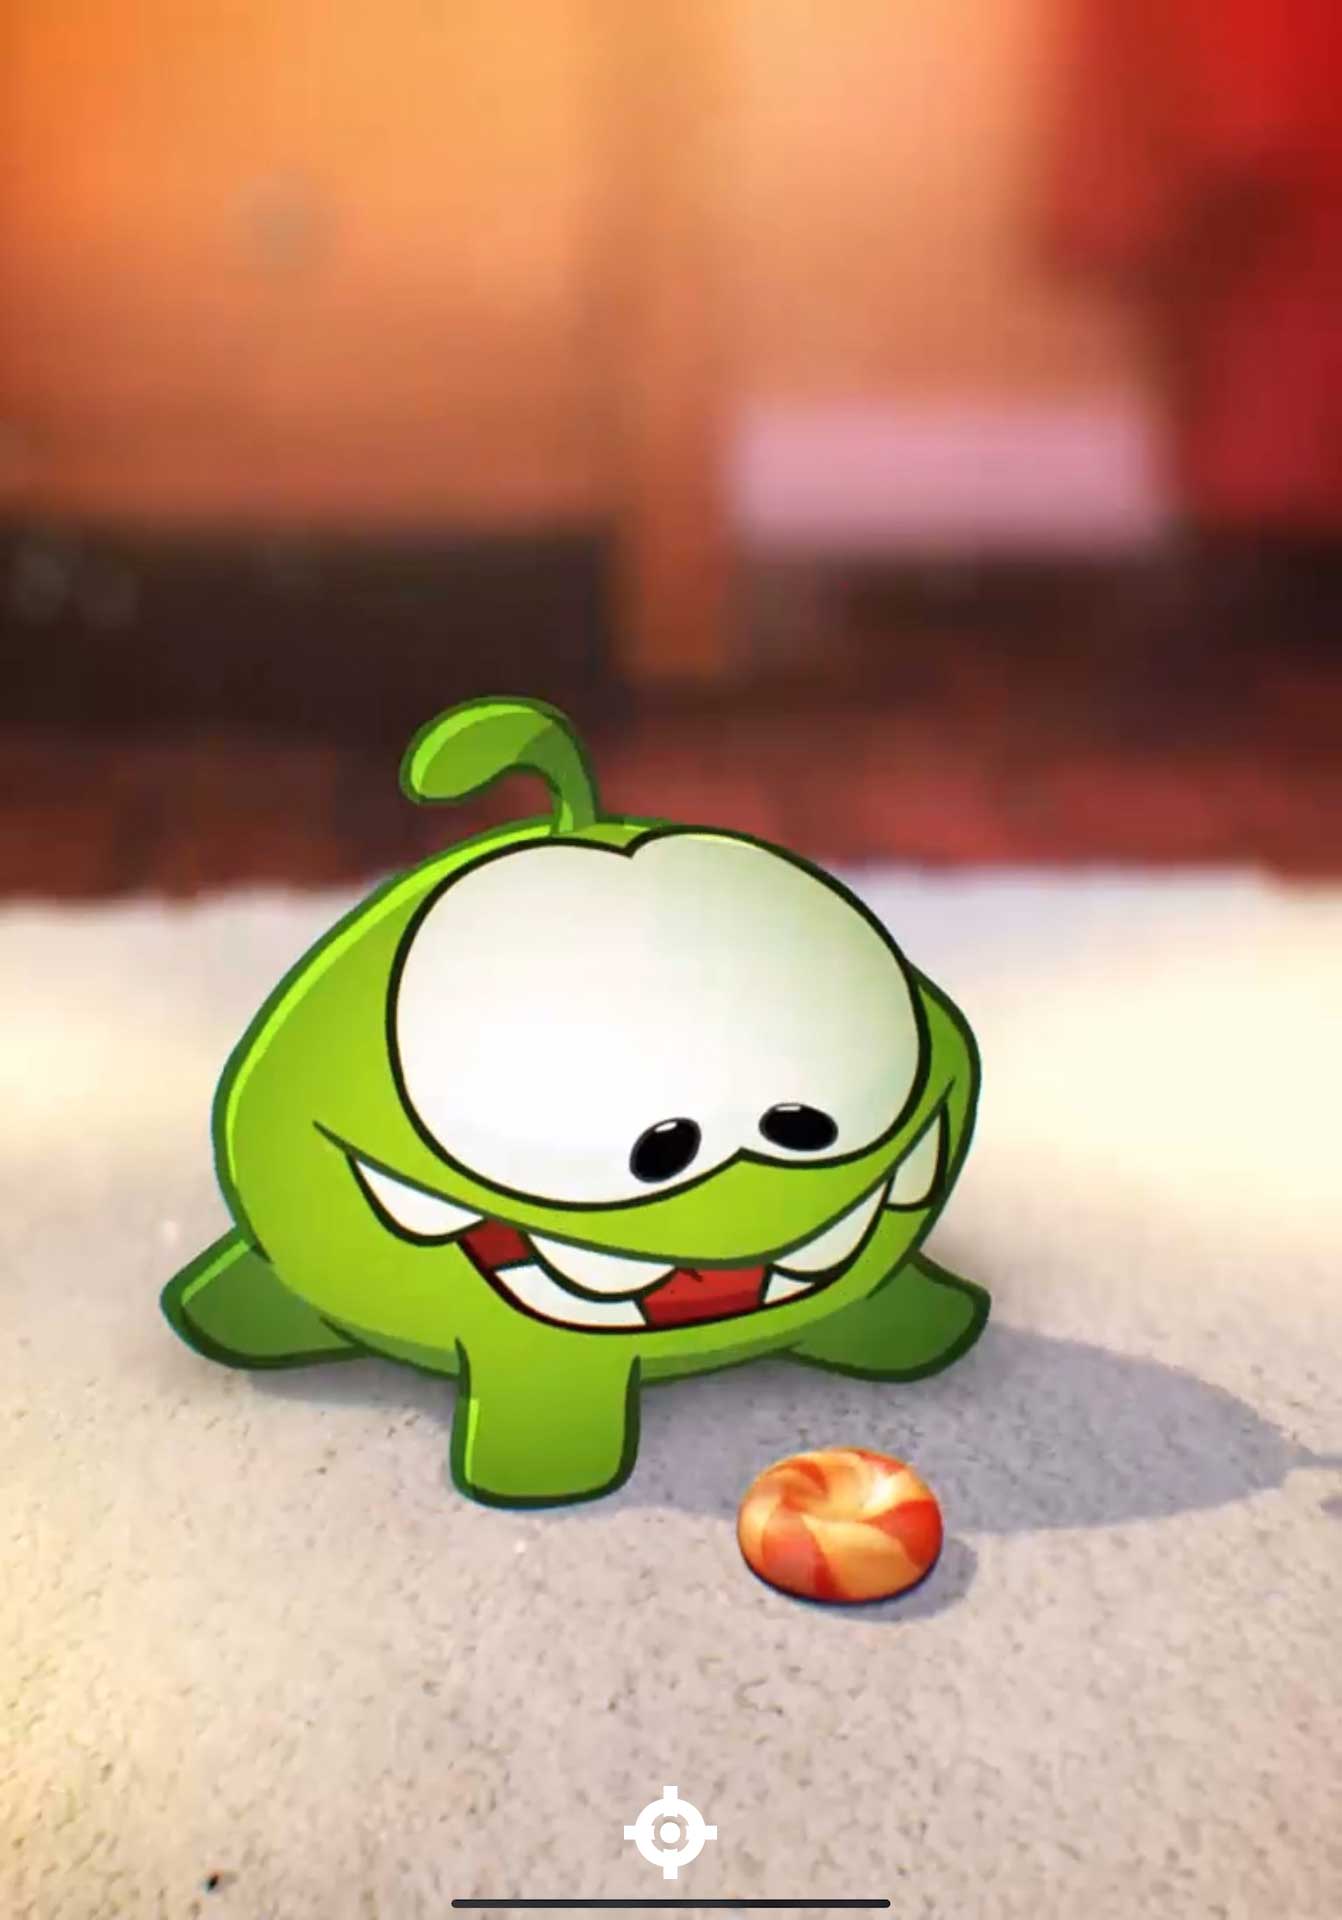 Cut The Rope: Time Travel · Recreo Gamer